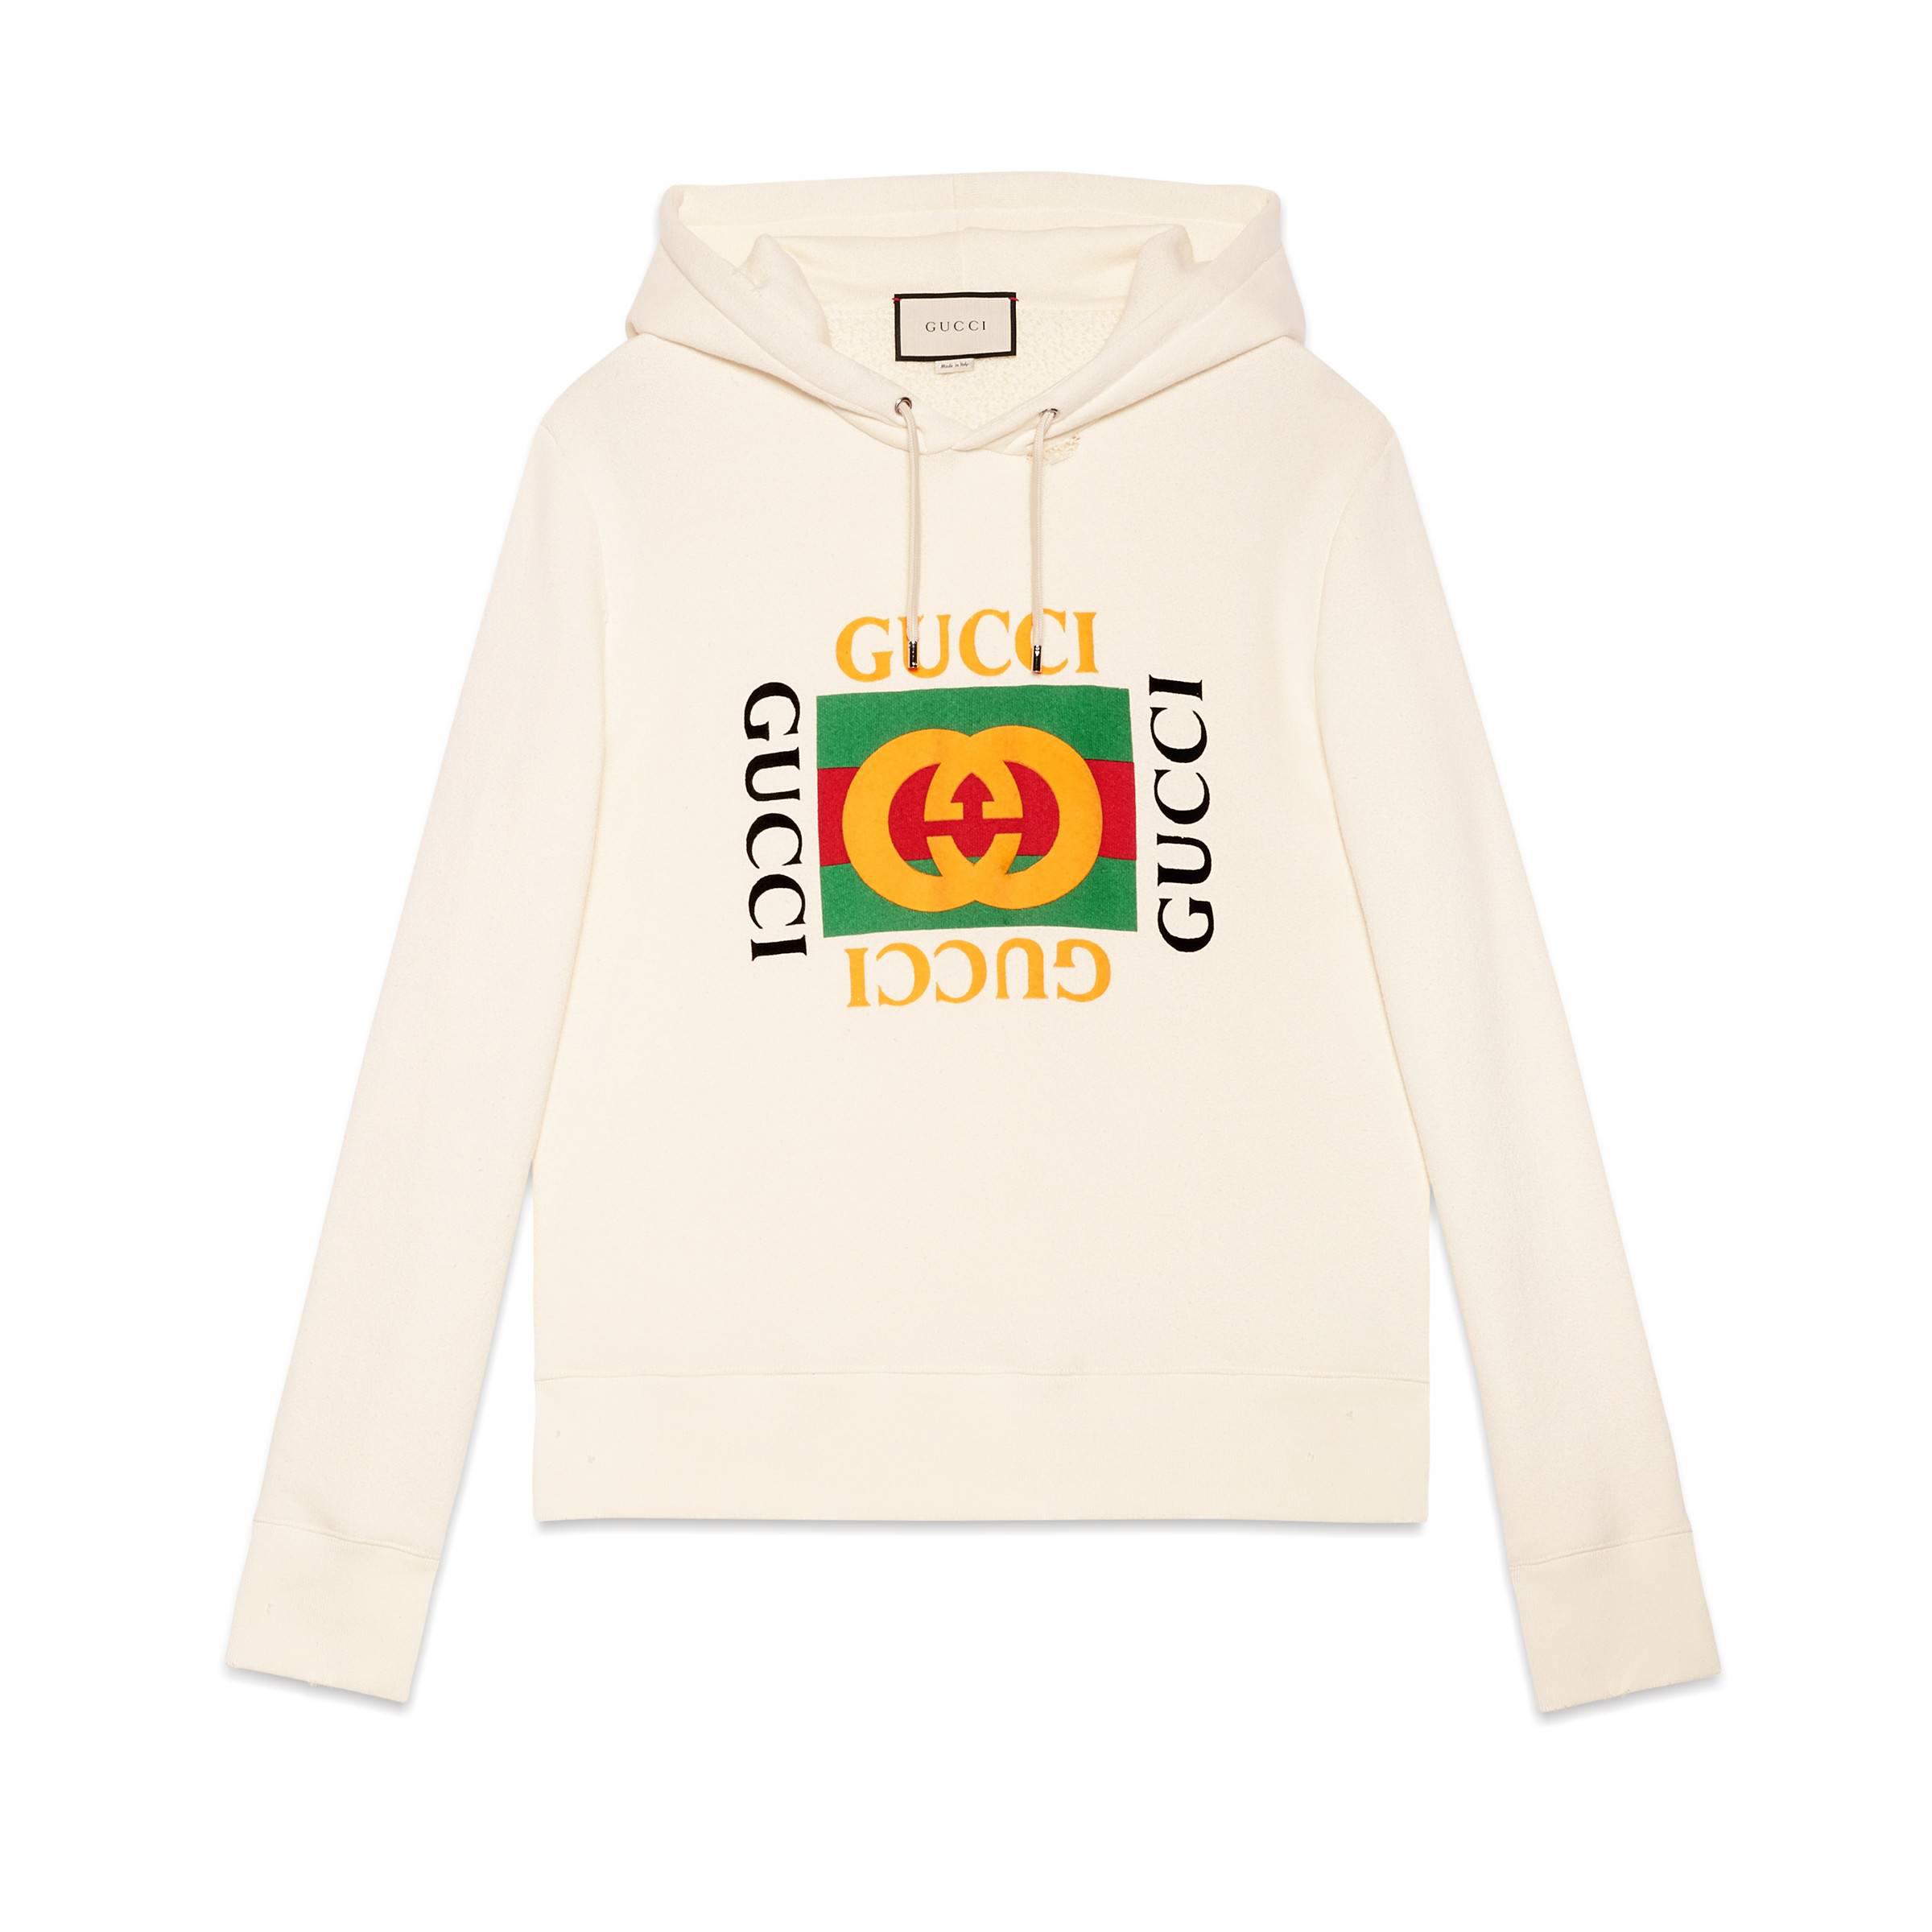 Gucci Cotton Sweatshirt With Print in White for Men - Save 2. ...